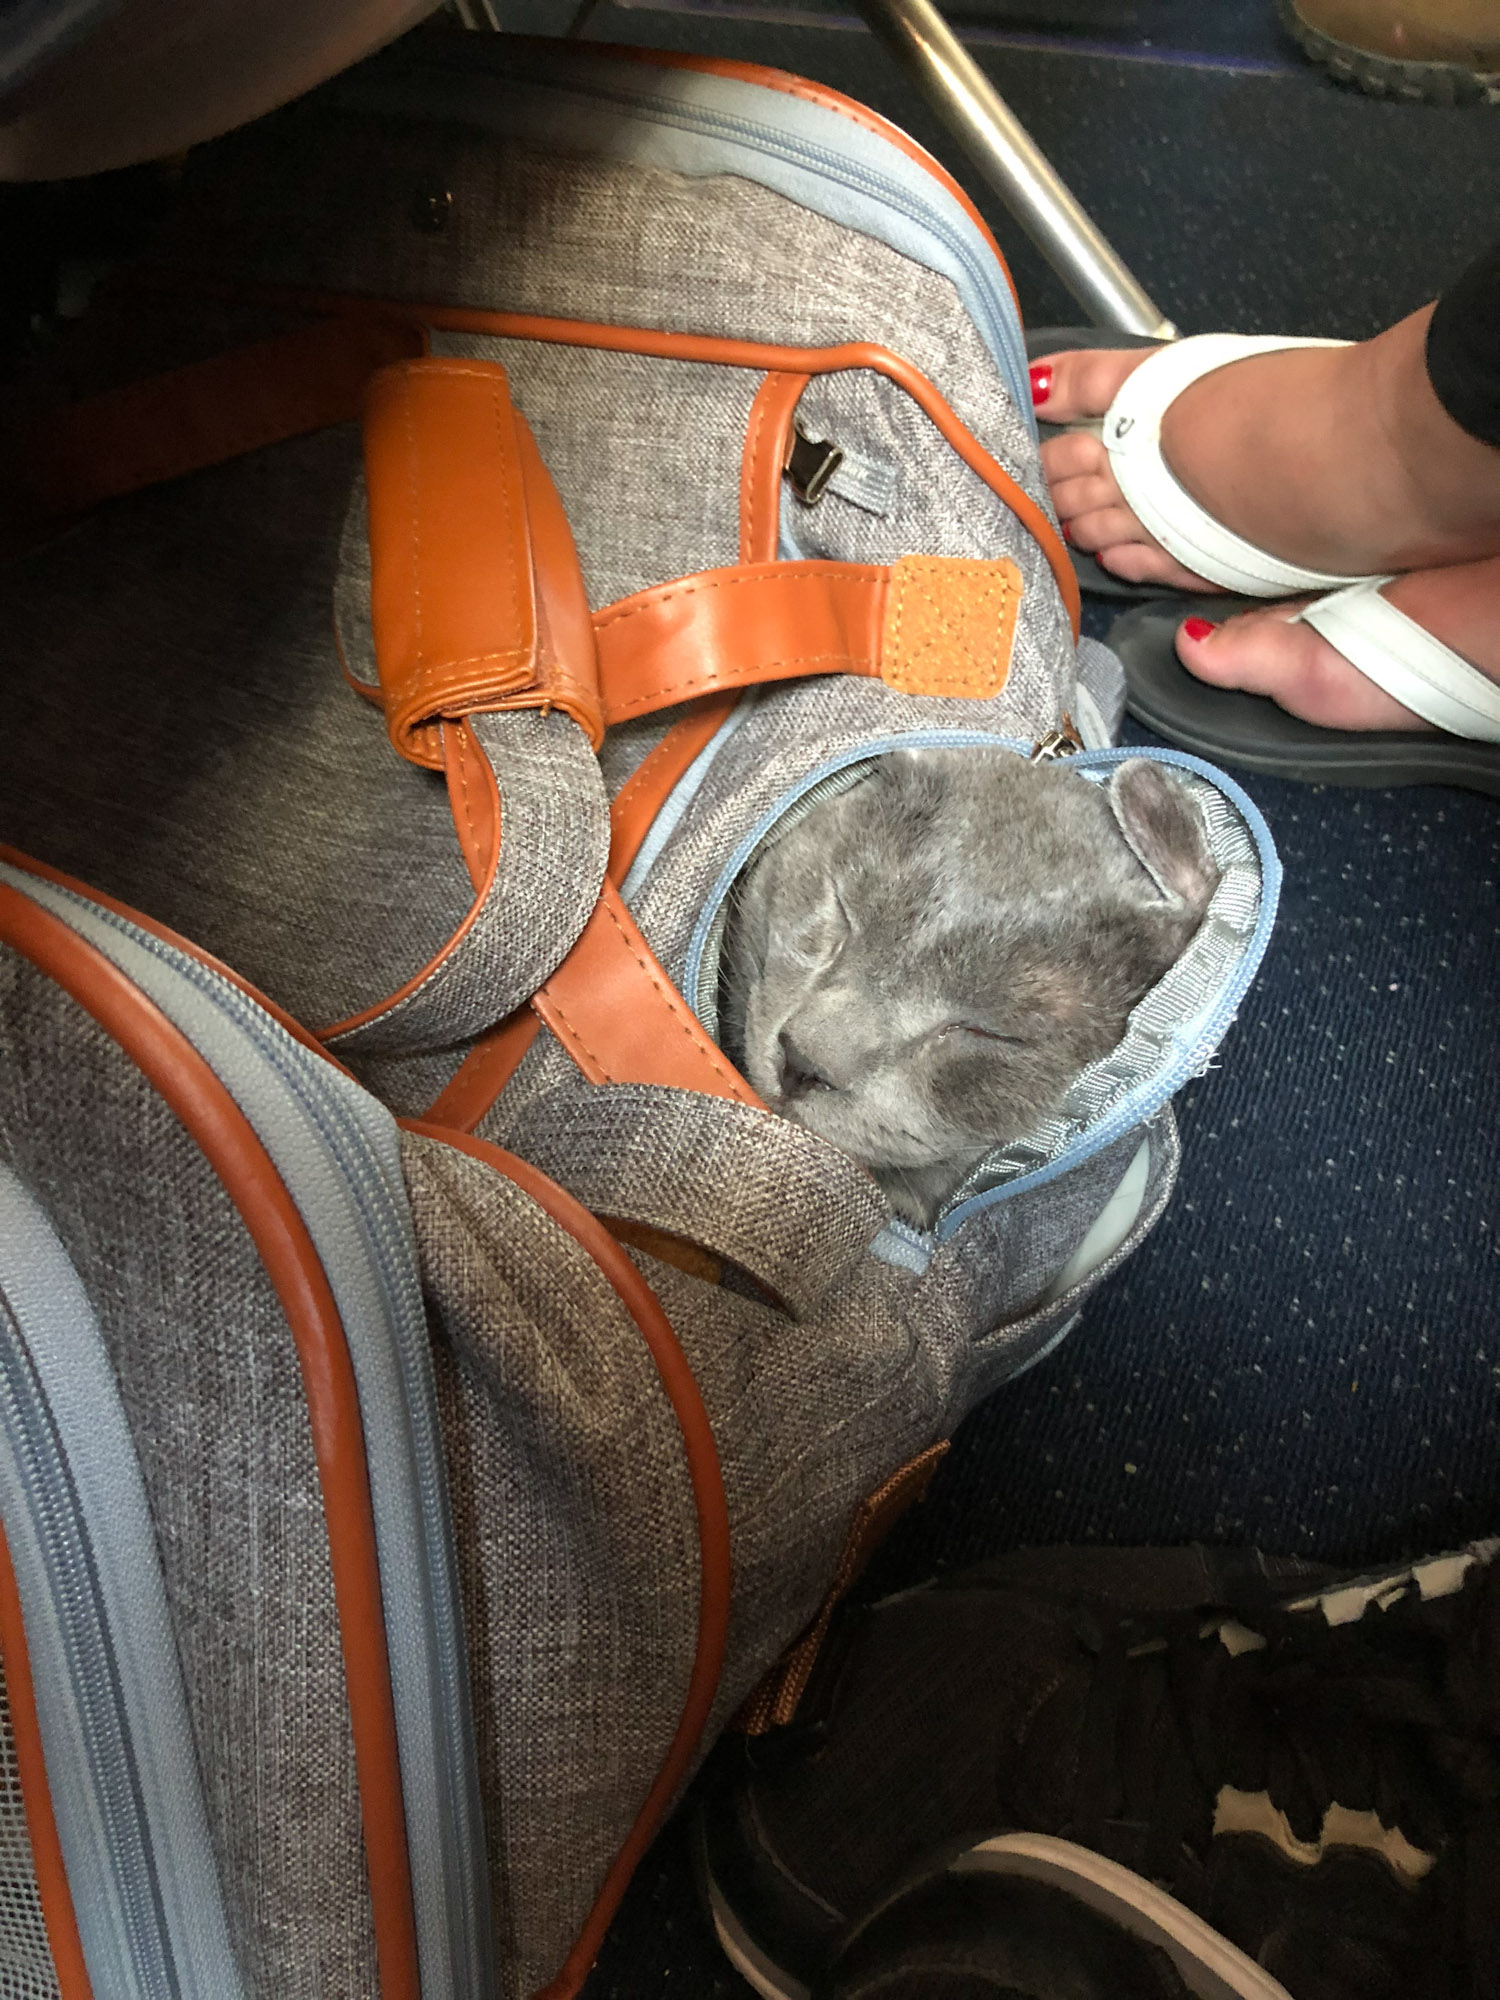 Walt the cat takes a nap in a bag